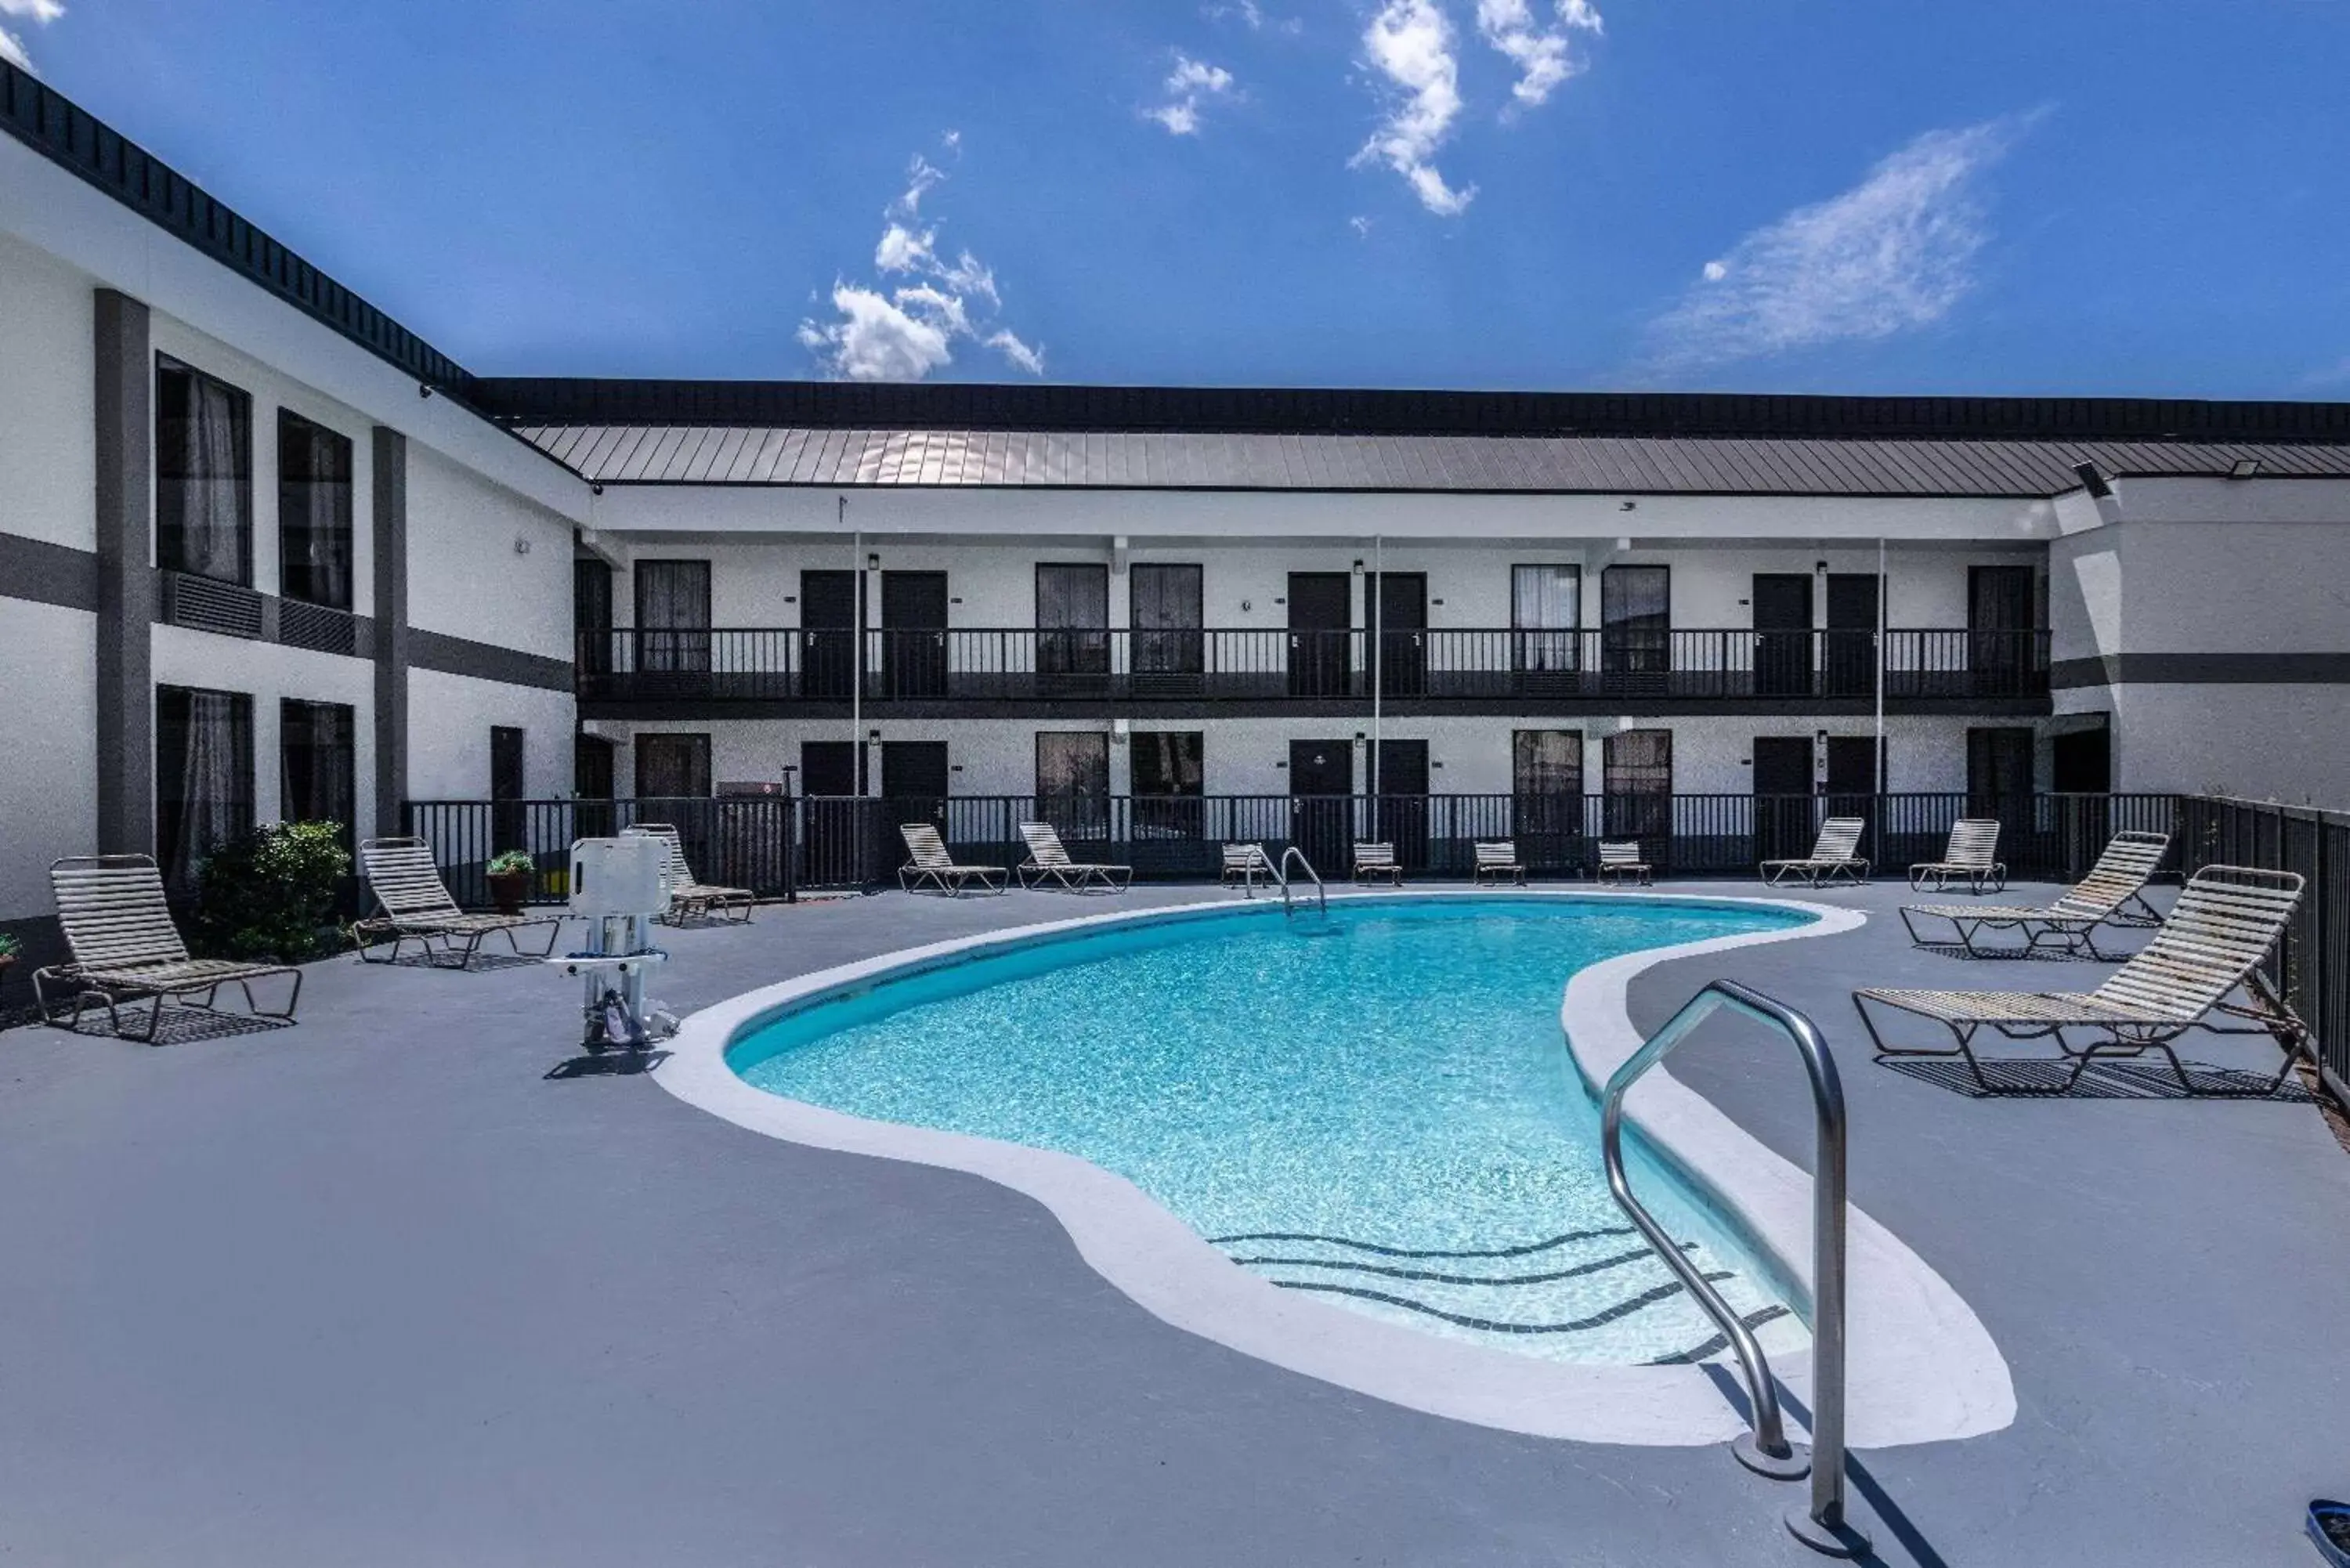 Pool view, Property Building in Days Inn & Suites by Wyndham Fort Bragg/Cross Creek Mall